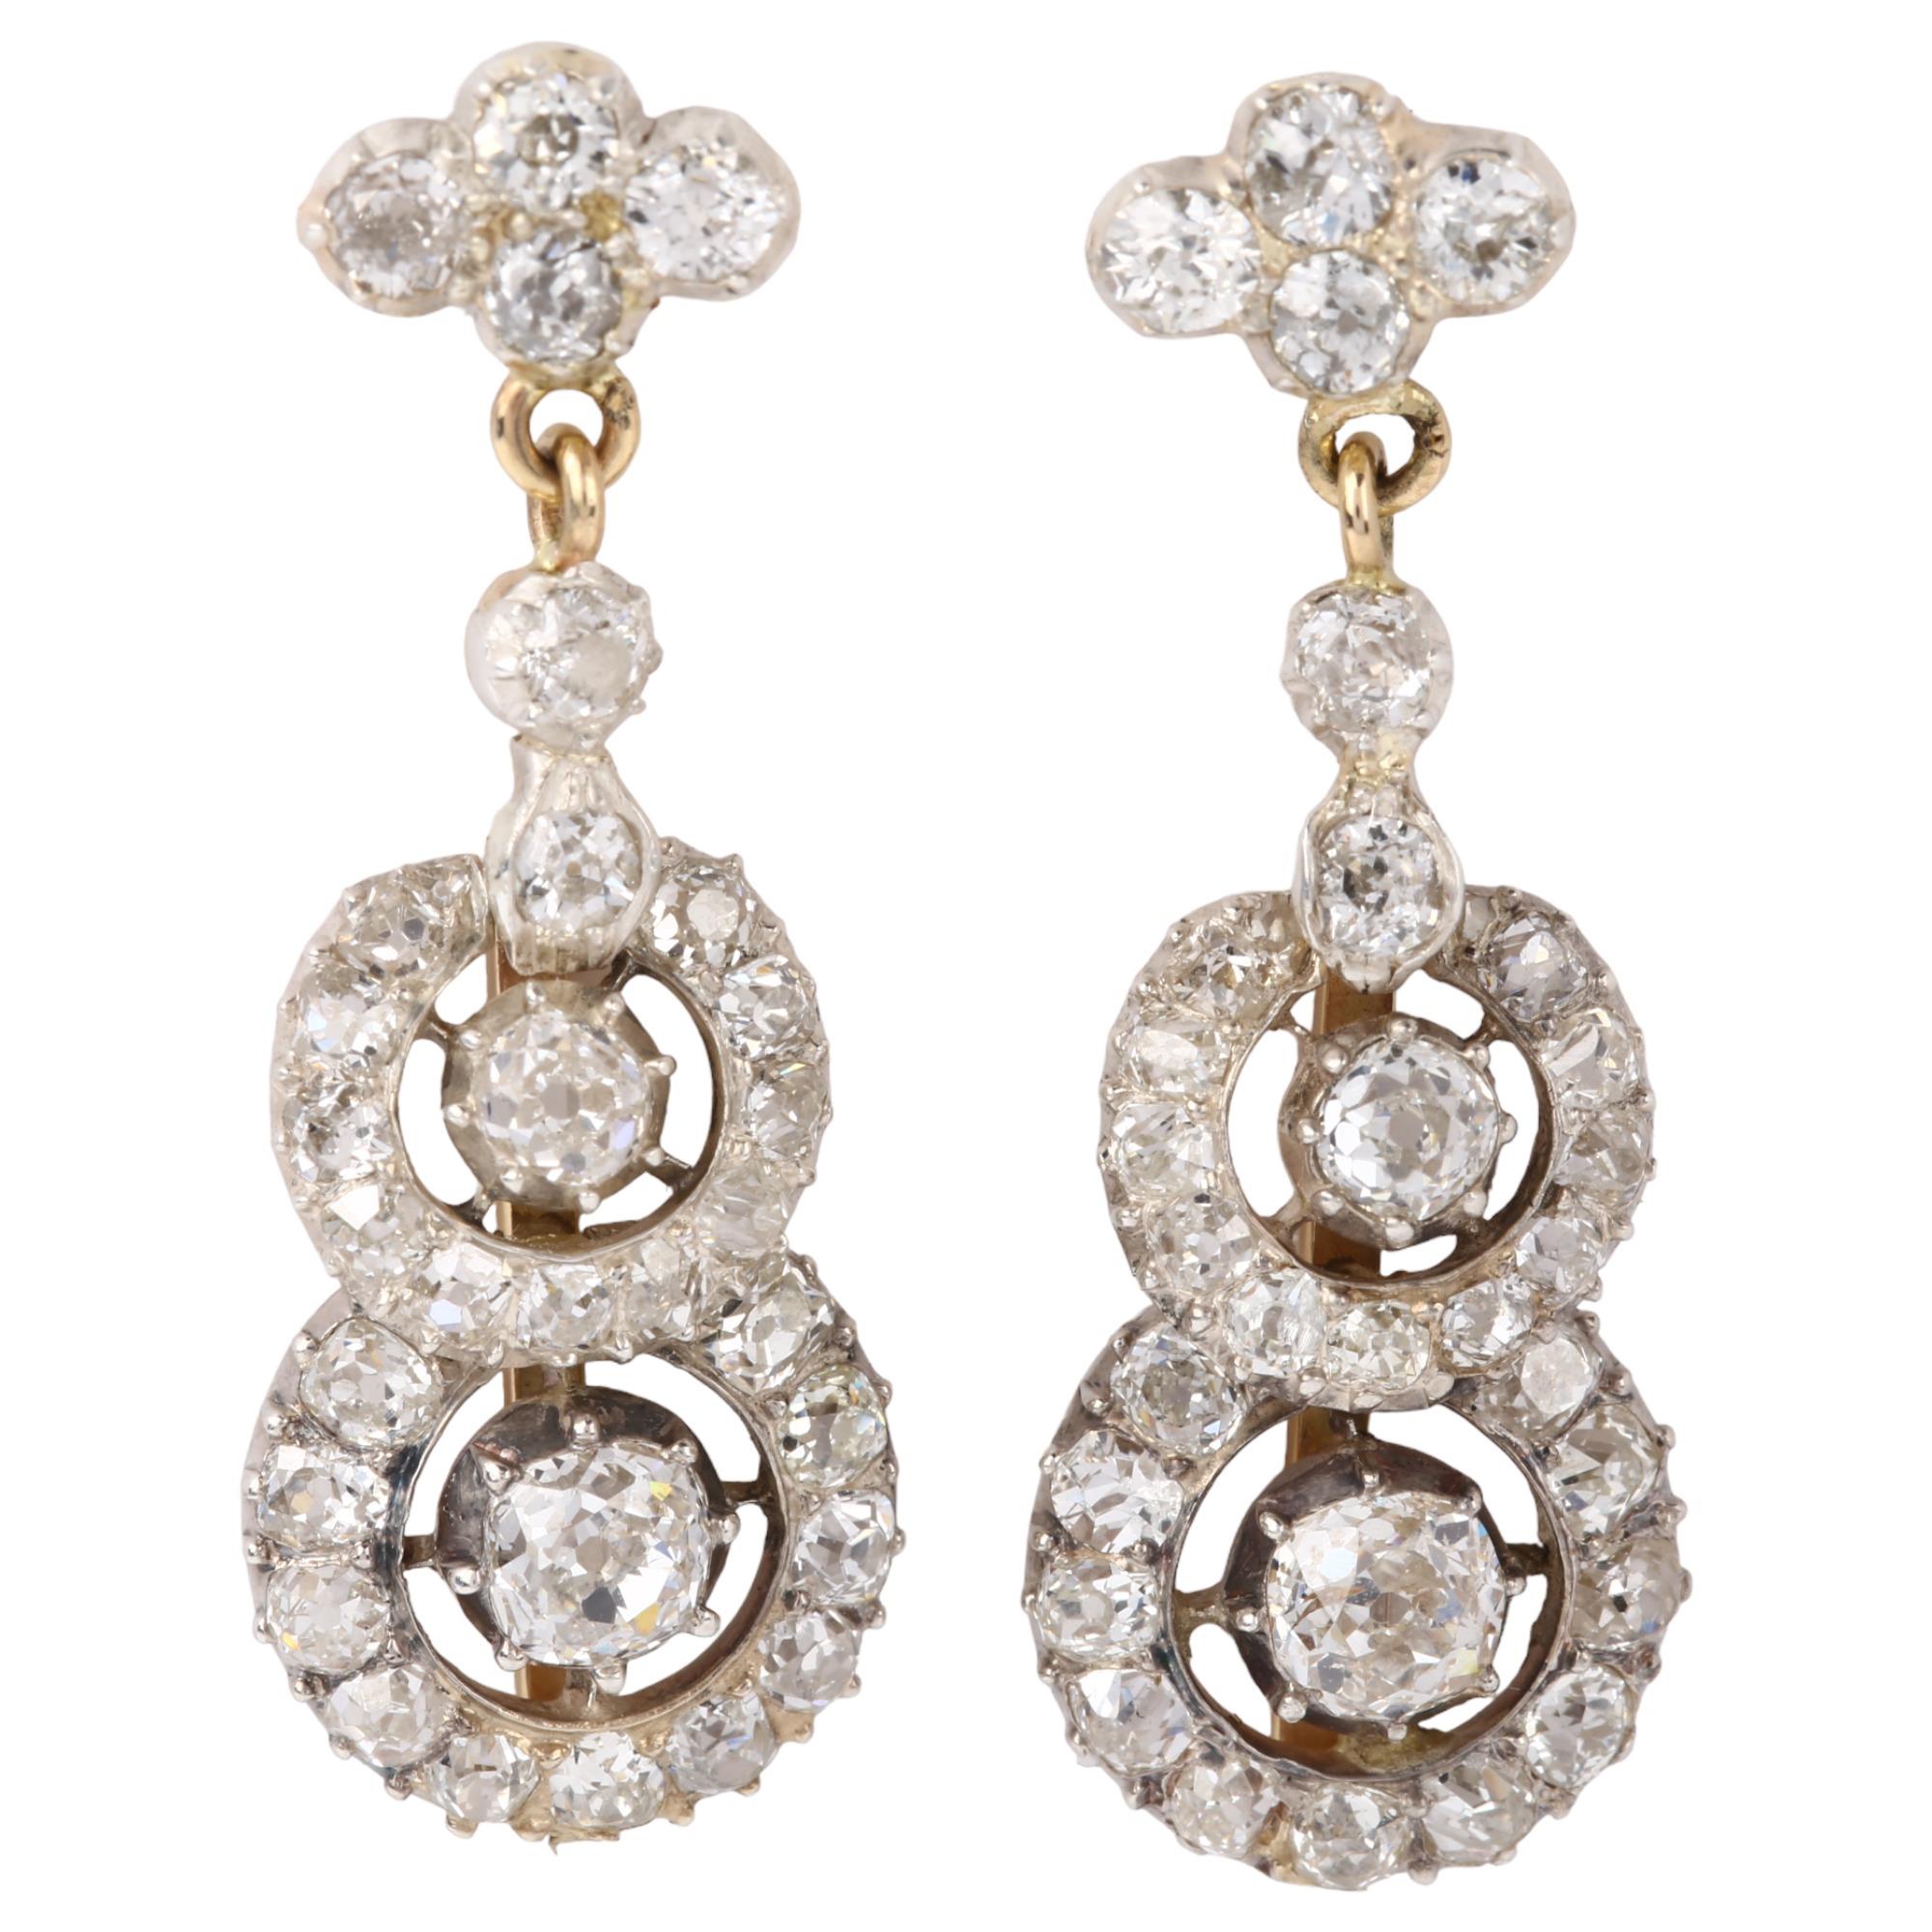 A fine pair of diamond target drop earrings, unmarked gold and silver settings with old-cut